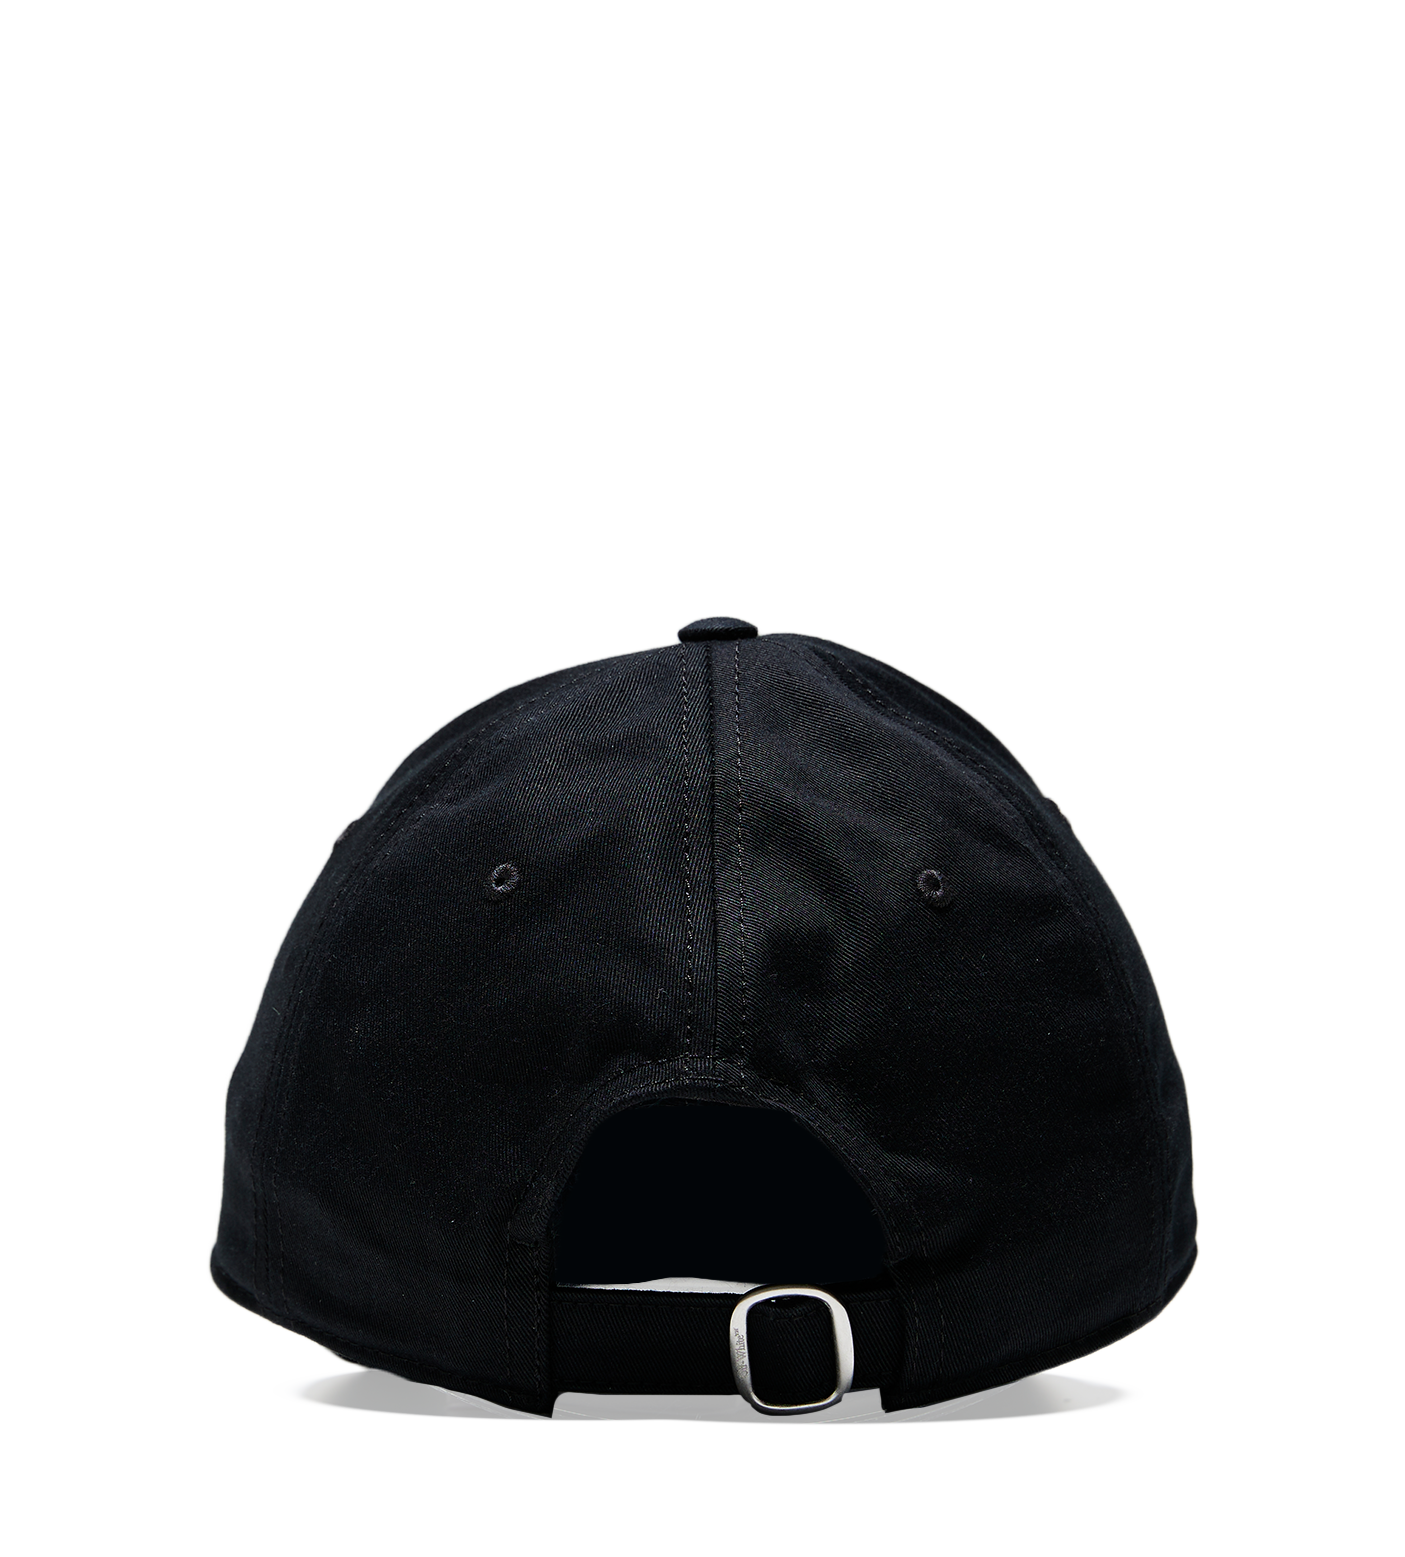 Arrows Embroidered Cap Black